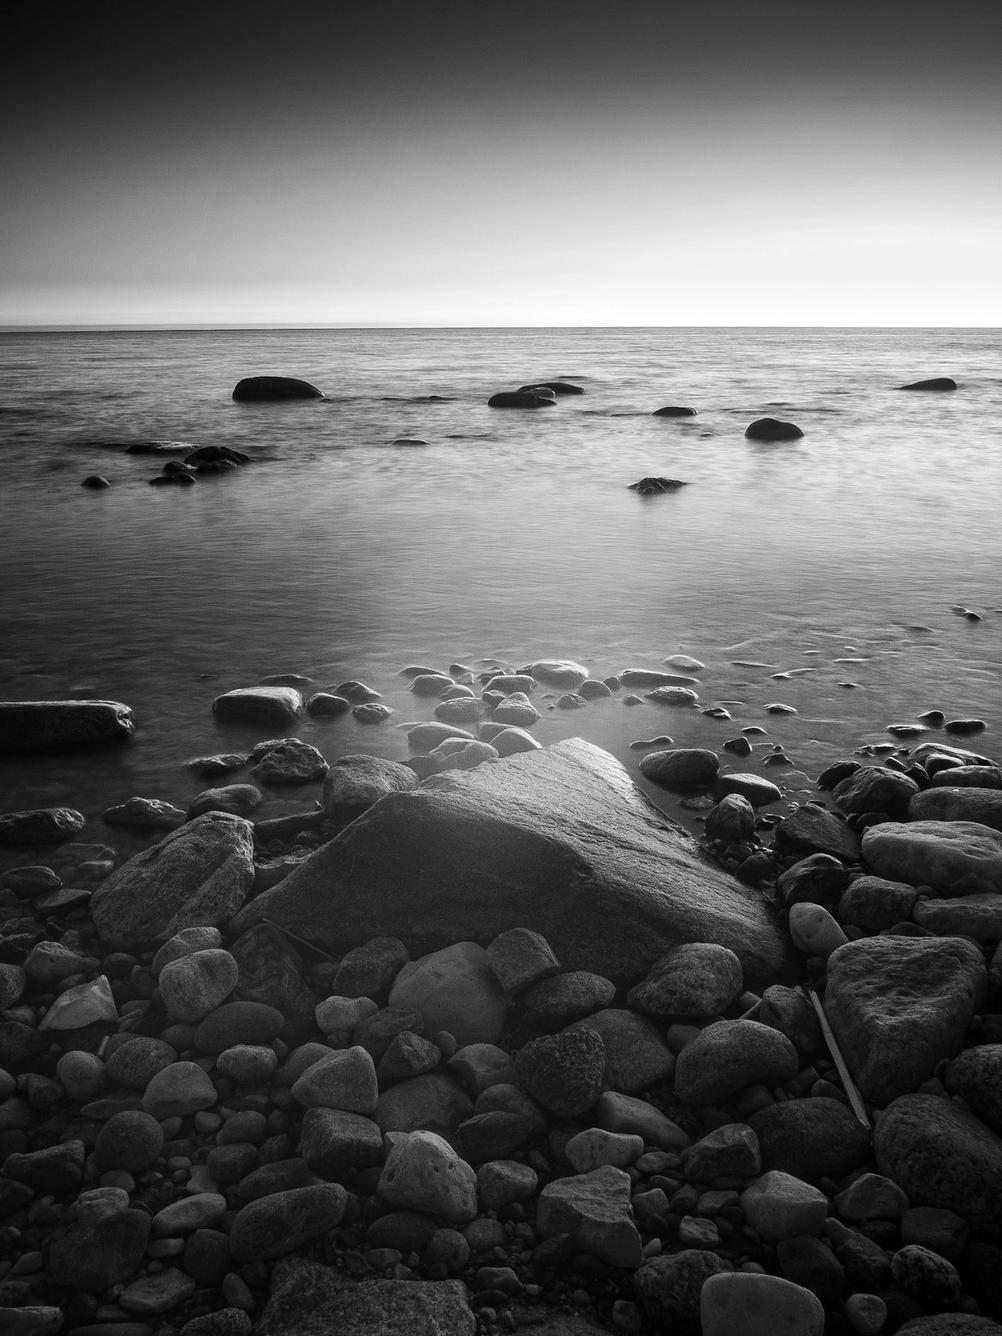 Photo of rocks on a beach taken with an infrared converted camera.